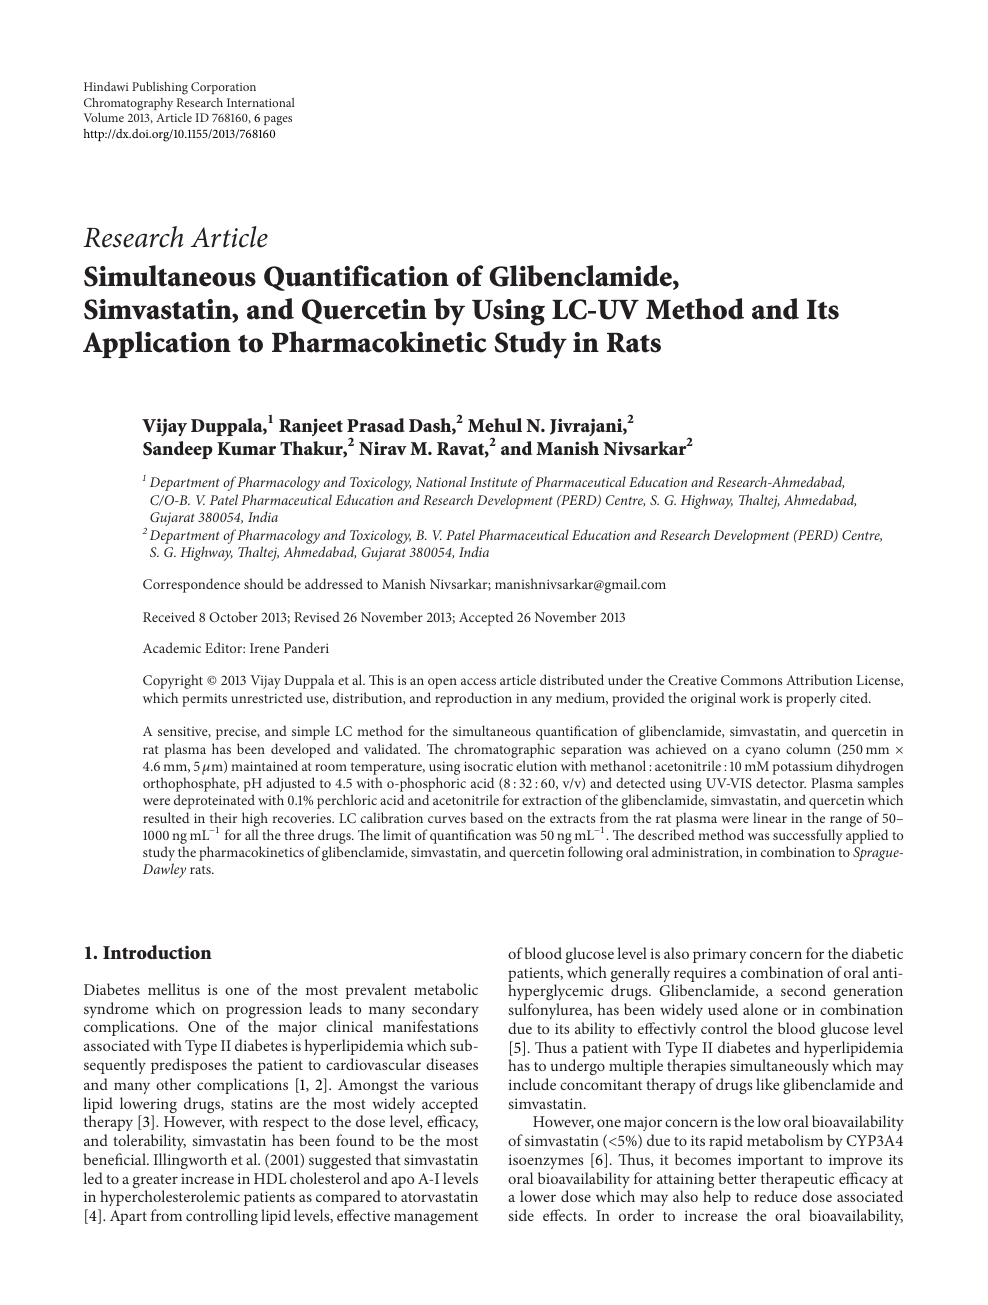 Simultaneous Quantification Of Glibenclamide Simvastatin And Quercetin By Using Lc Uv Method And Its Application To Pharmacokinetic Study In Rats Topic Of Research Paper In Chemical Sciences Download Scholarly Article Pdf And